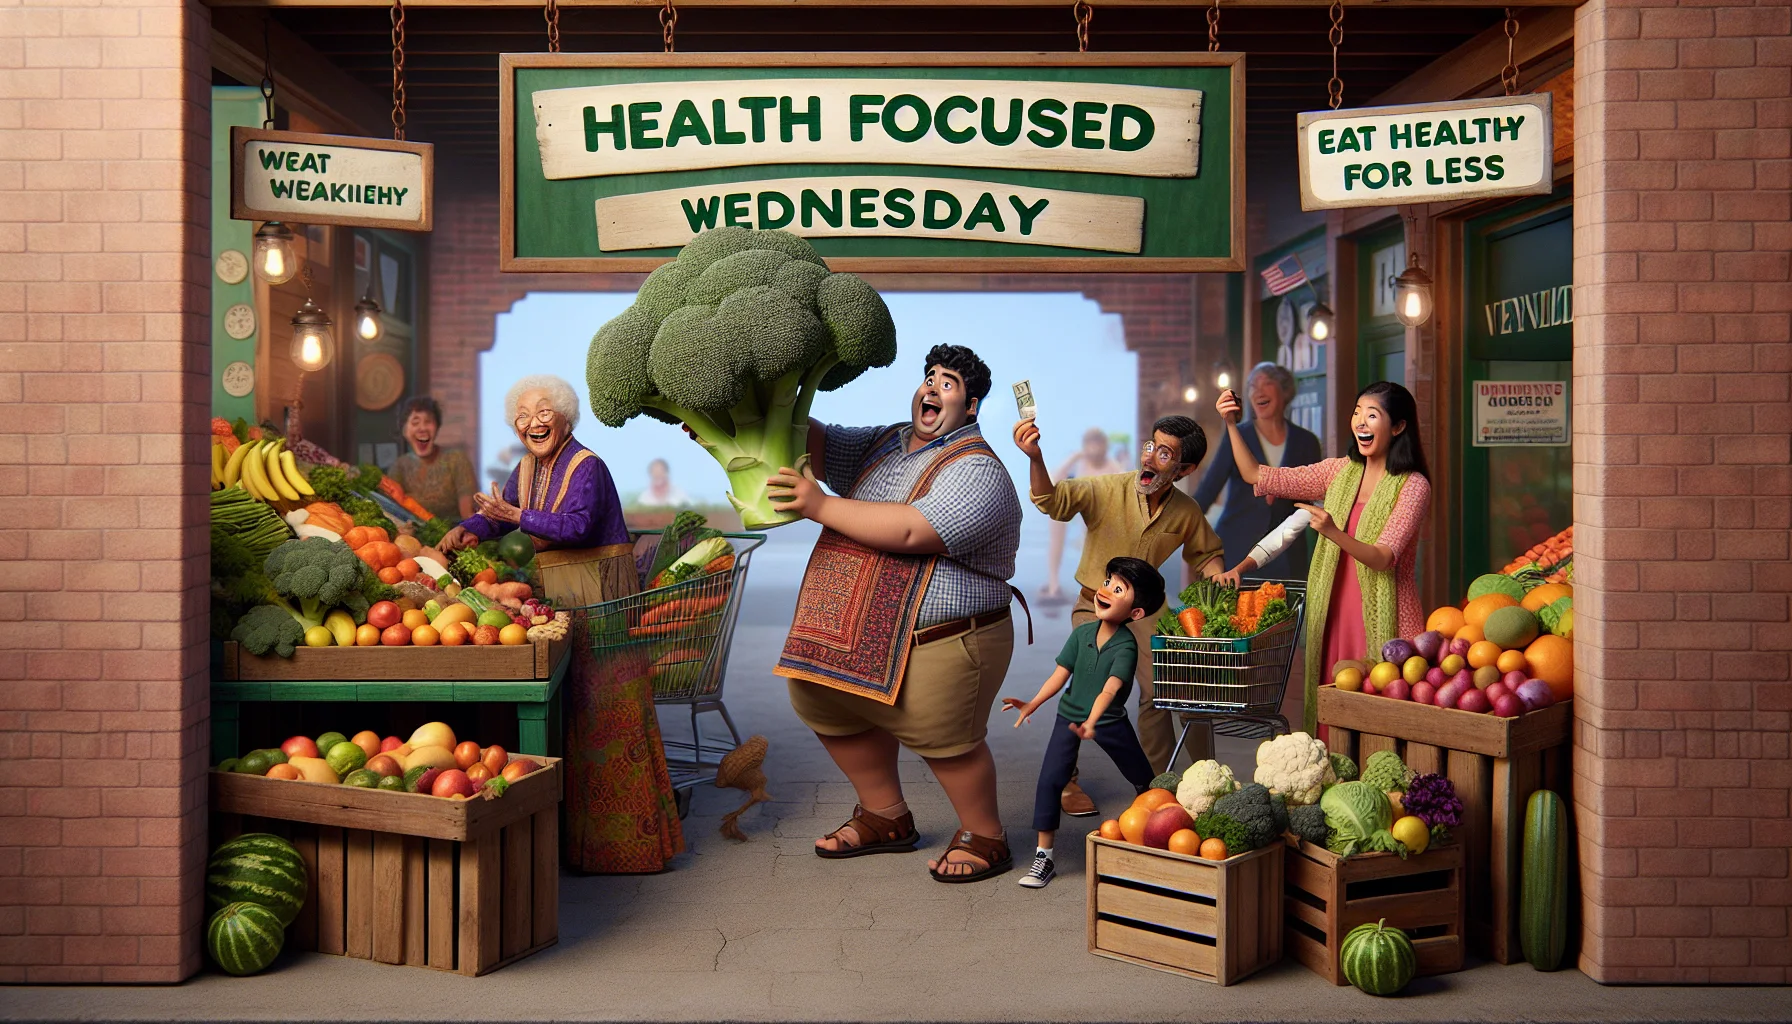 Visualize a humorous scenario themed around Health Focused Wednesday. Let's begin with a vibrant farmers' market, brimming with fresh, colorful fruits and vegetables displayed in rustic wooden crates. A sign reading 'Health Focused Wednesday - Eat Healthy for Less' stands prominently at the entrance. For diversity, include an elderly Asian man humorously weighing a giant, oversized broccoli in one hand and change from a recent purchase in the other, a shocked expression on his face. Add a couple of Caucasian children, a boy and a girl, gleefully racing with their carts filled with healthy foods. In the background, a South Asian female vendor, wearing traditional clothing, is laughing heartily at the sight. The overall atmosphere is lively, warm, and inviting, perfectly encapsulating the joy and affordability of eating healthy.